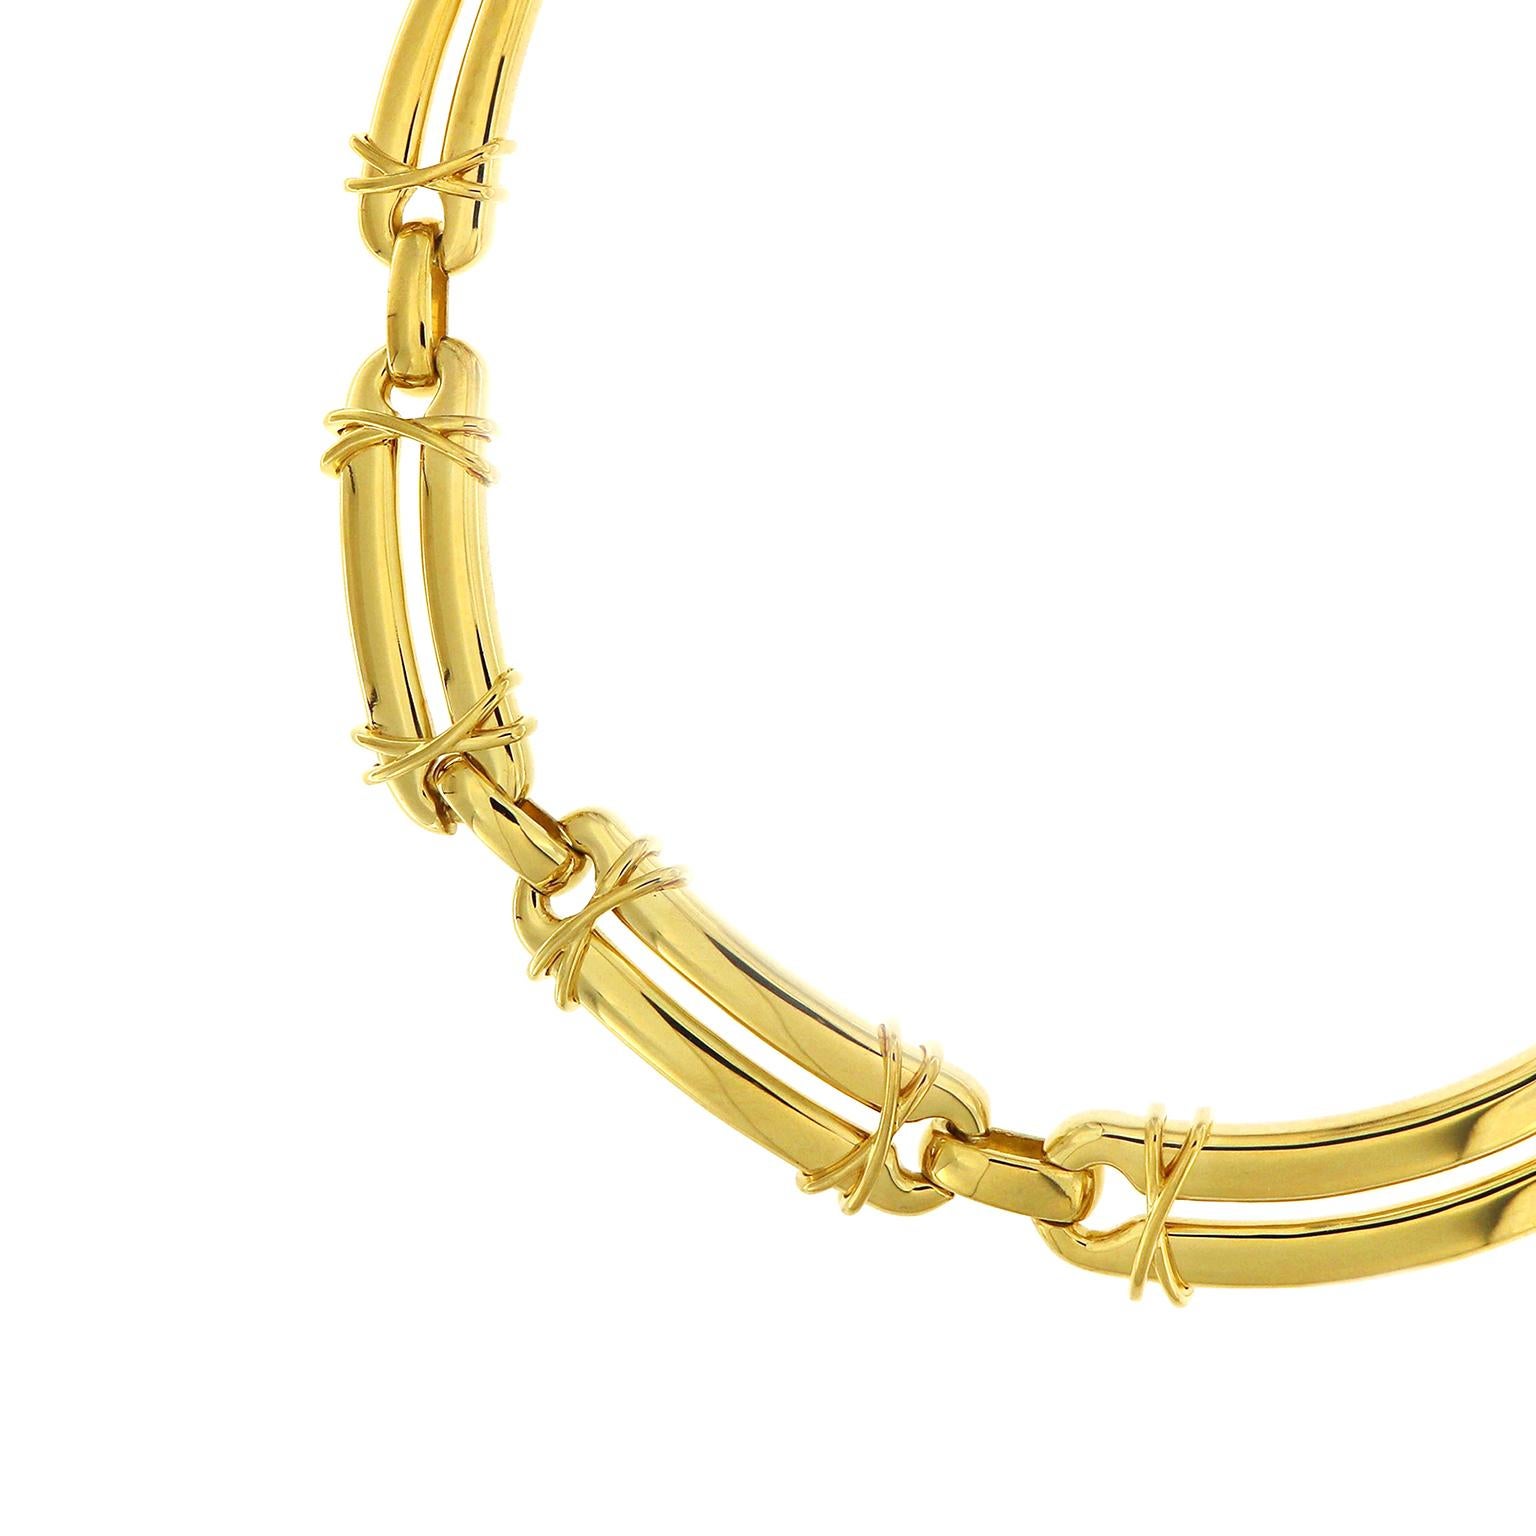 Golden radiance is the spotlight of this choker necklace. A pairing of 18k yellow gold strands forms links that connect to each other. The links are more elongated in the center and gradually become narrower towards each end of the necklace. Slender